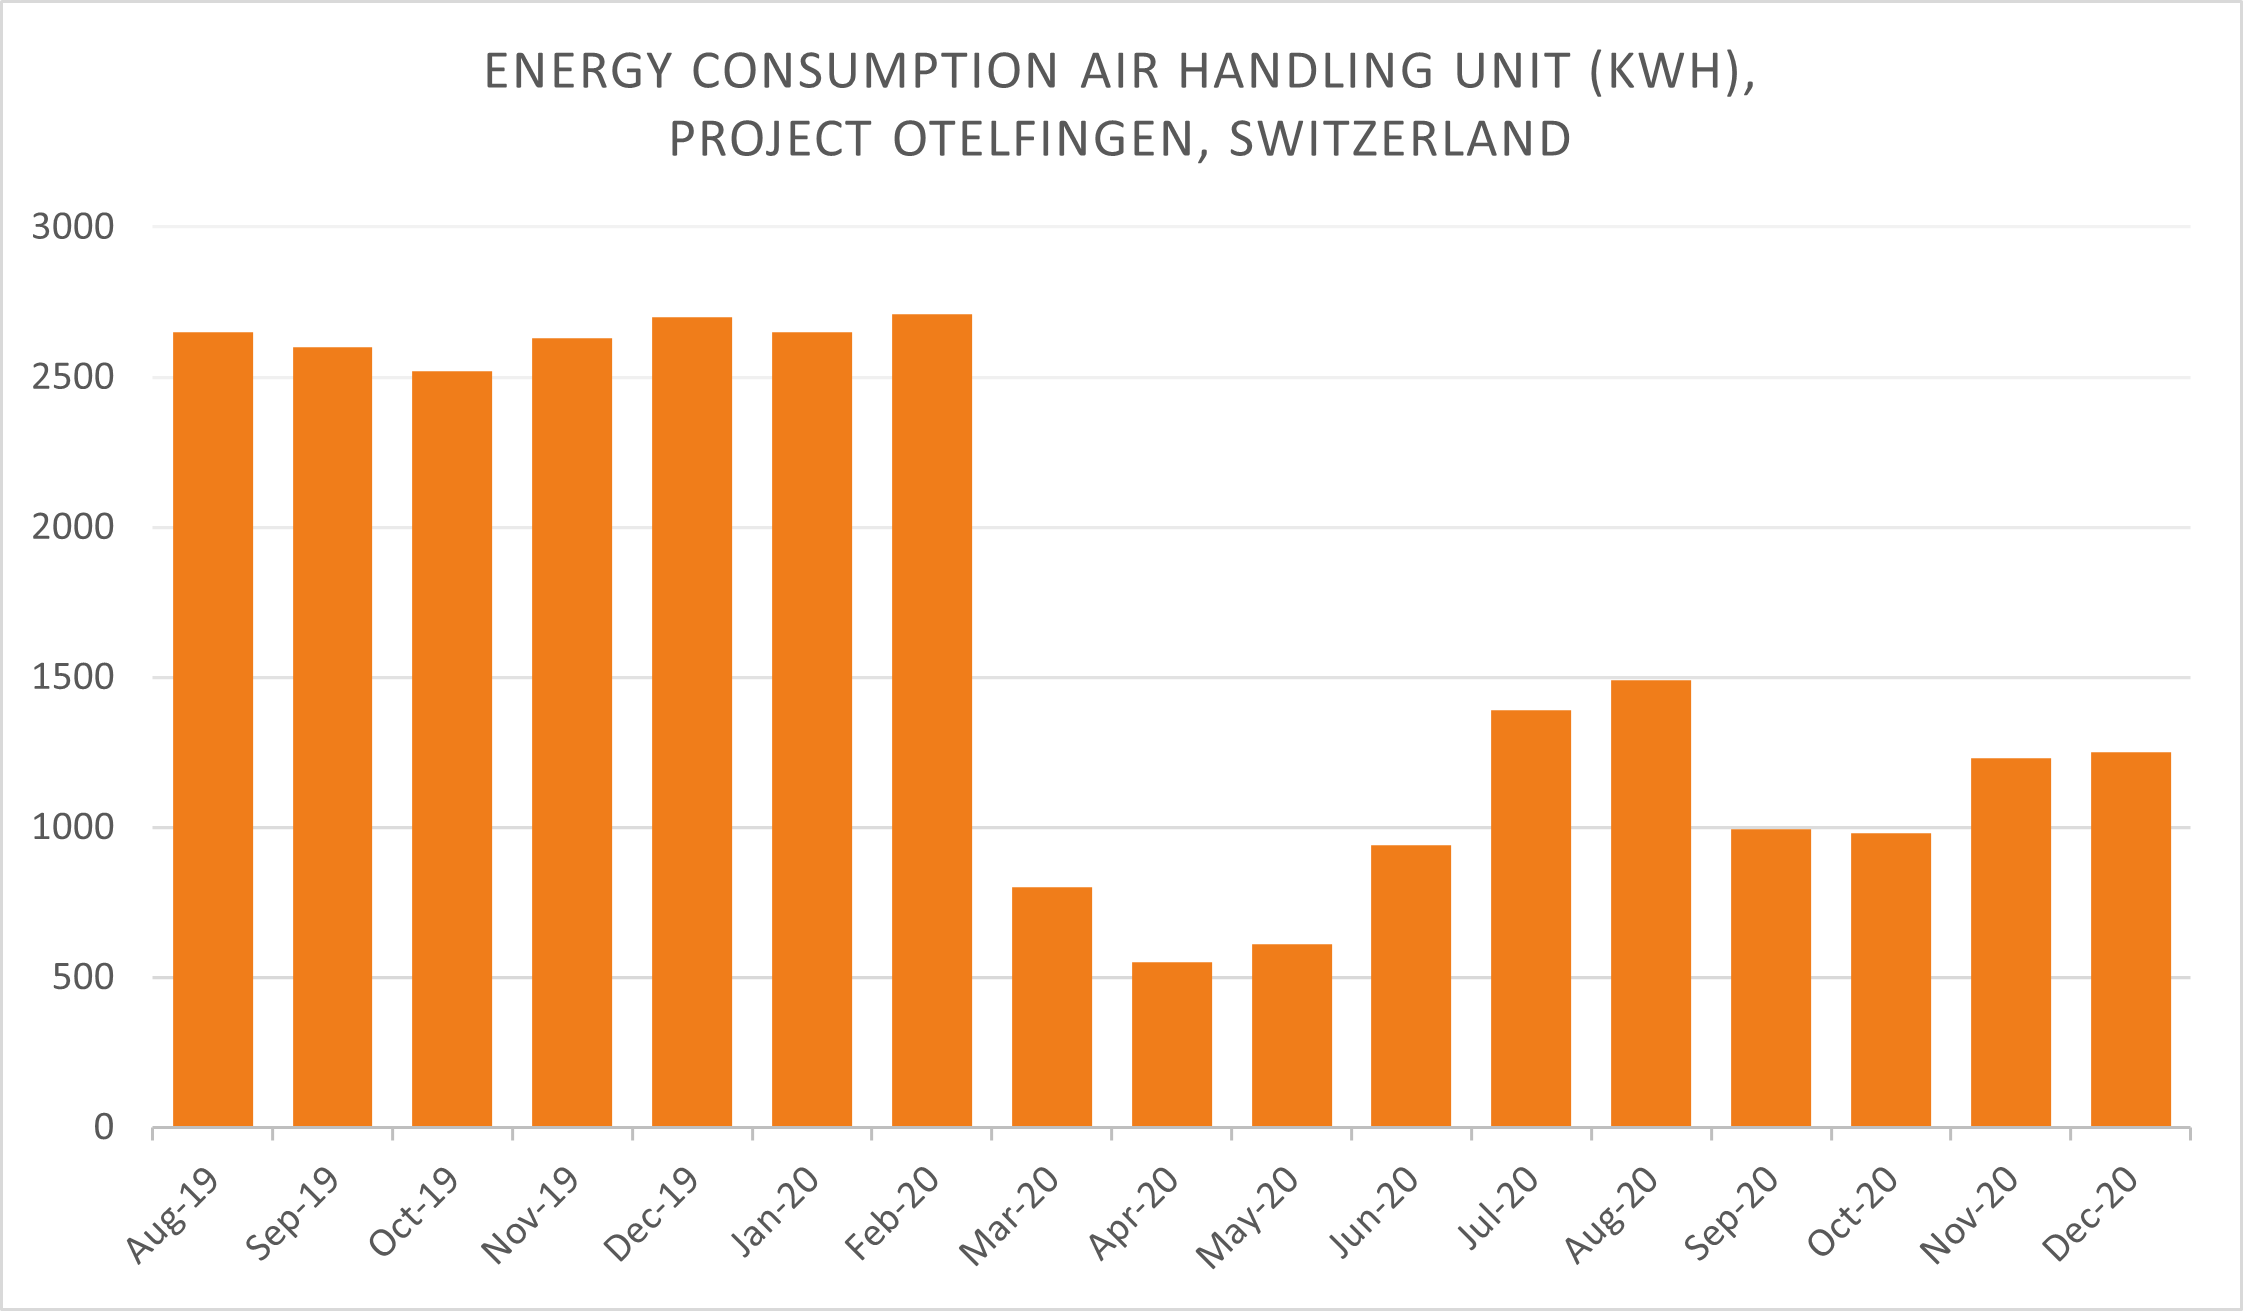 Figure 2: Title Energy Consumption Air Handling Unit in kWh, Project Otelfingen, Switzerland. Corrective adjustments fixed in March 2020.